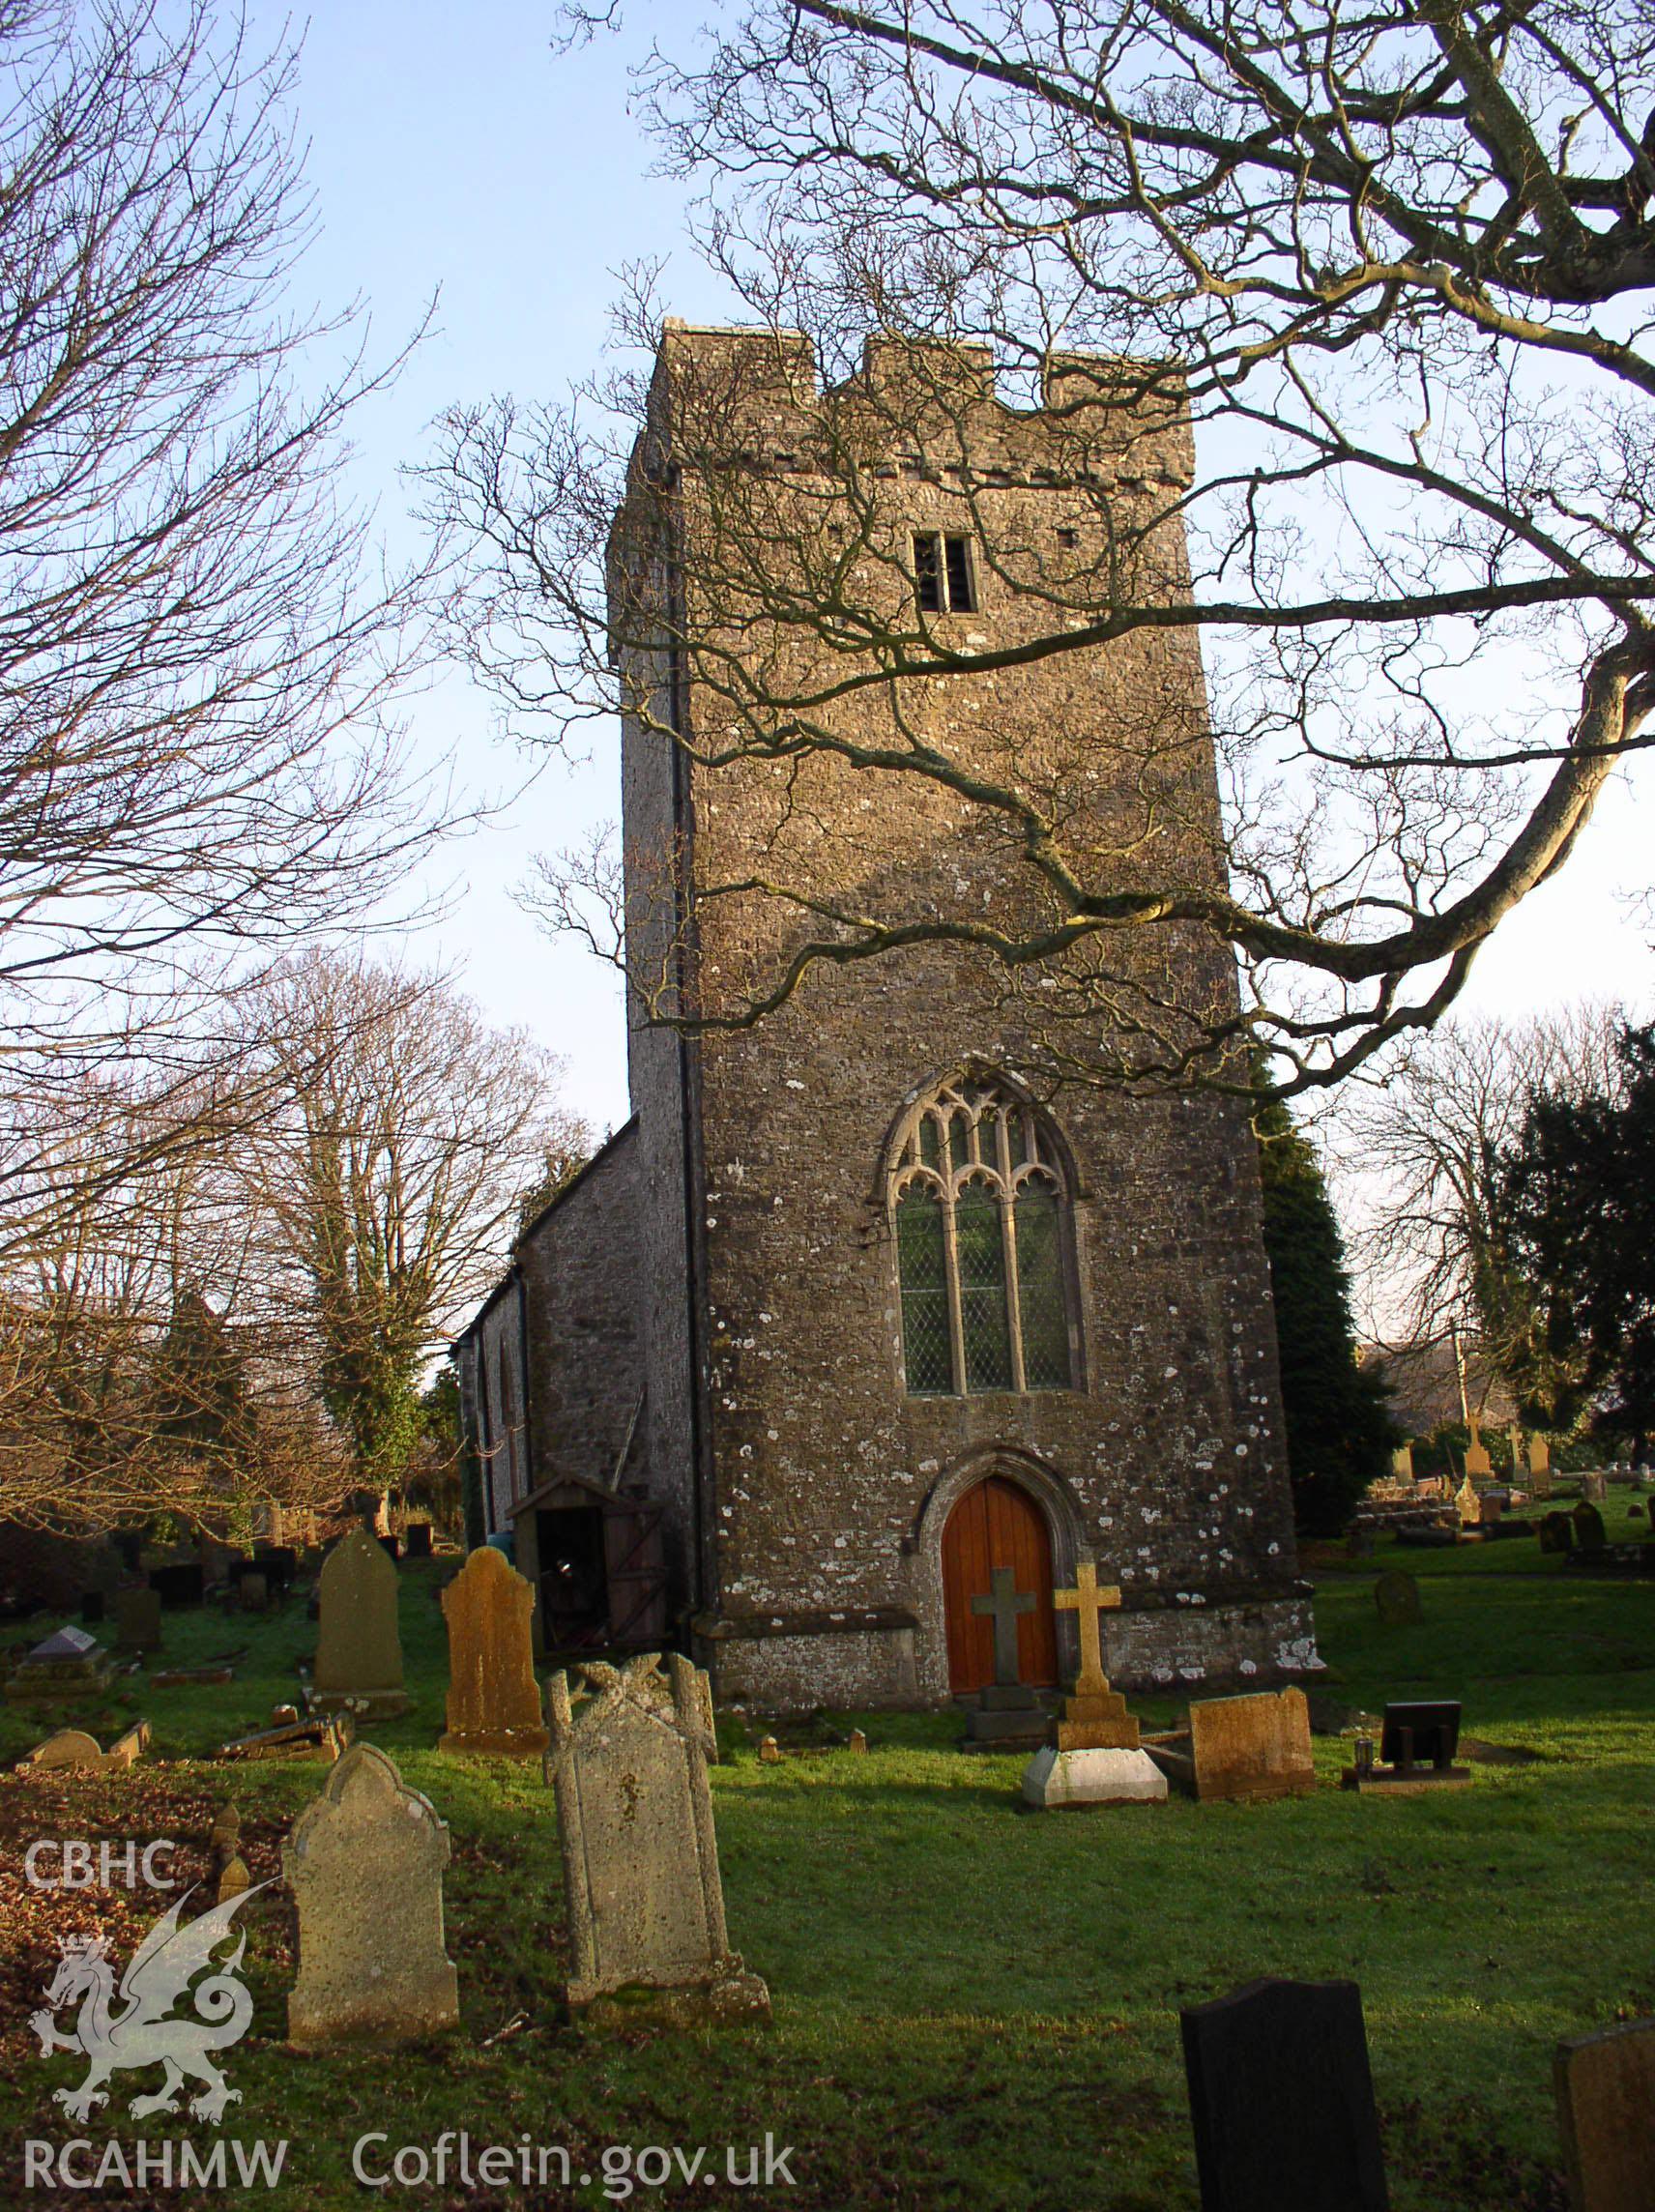 Colour digital photograph showing the exterior of St Mary's Church, Penmark; Glamorgan.